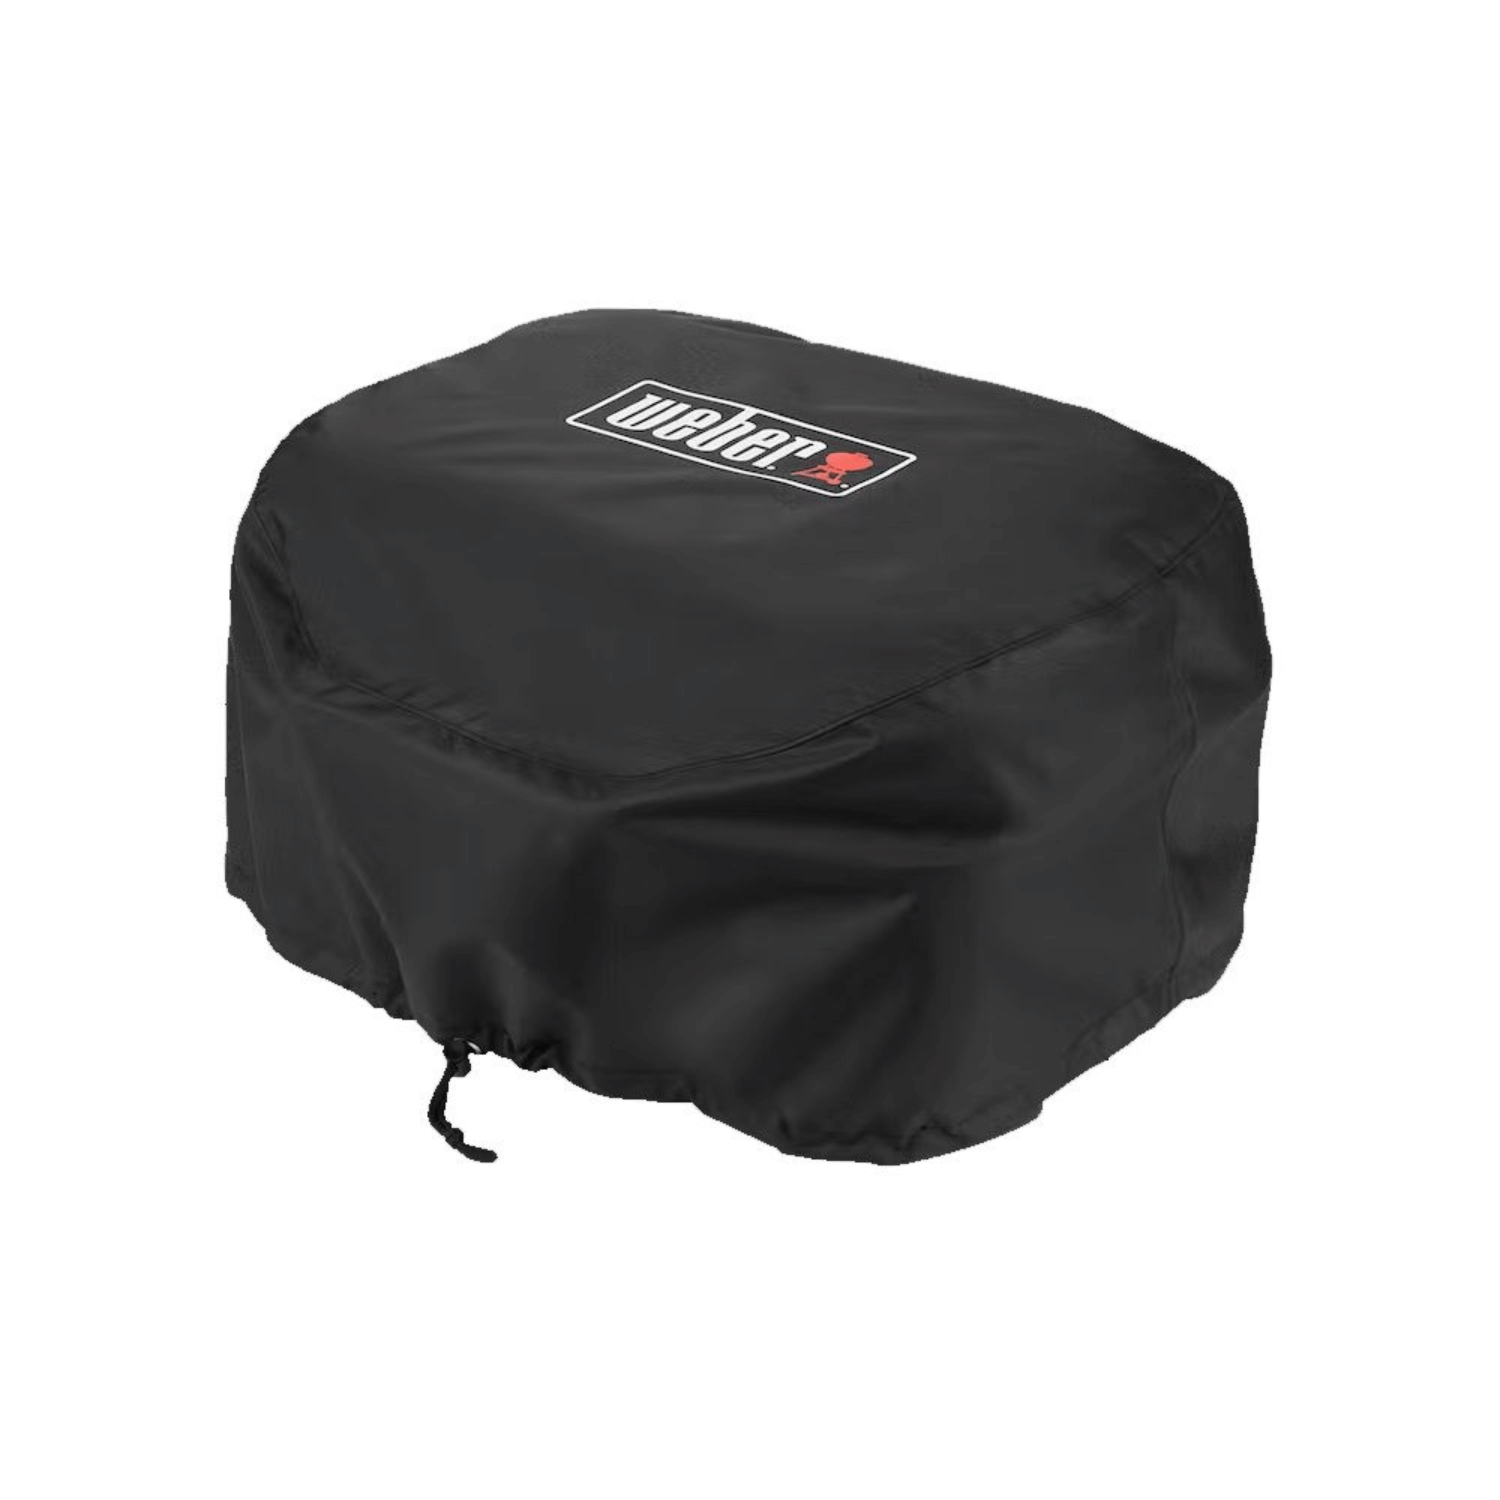 Weber Premium Grill Cover for outdoor barbecuing at MeatKing.hk3